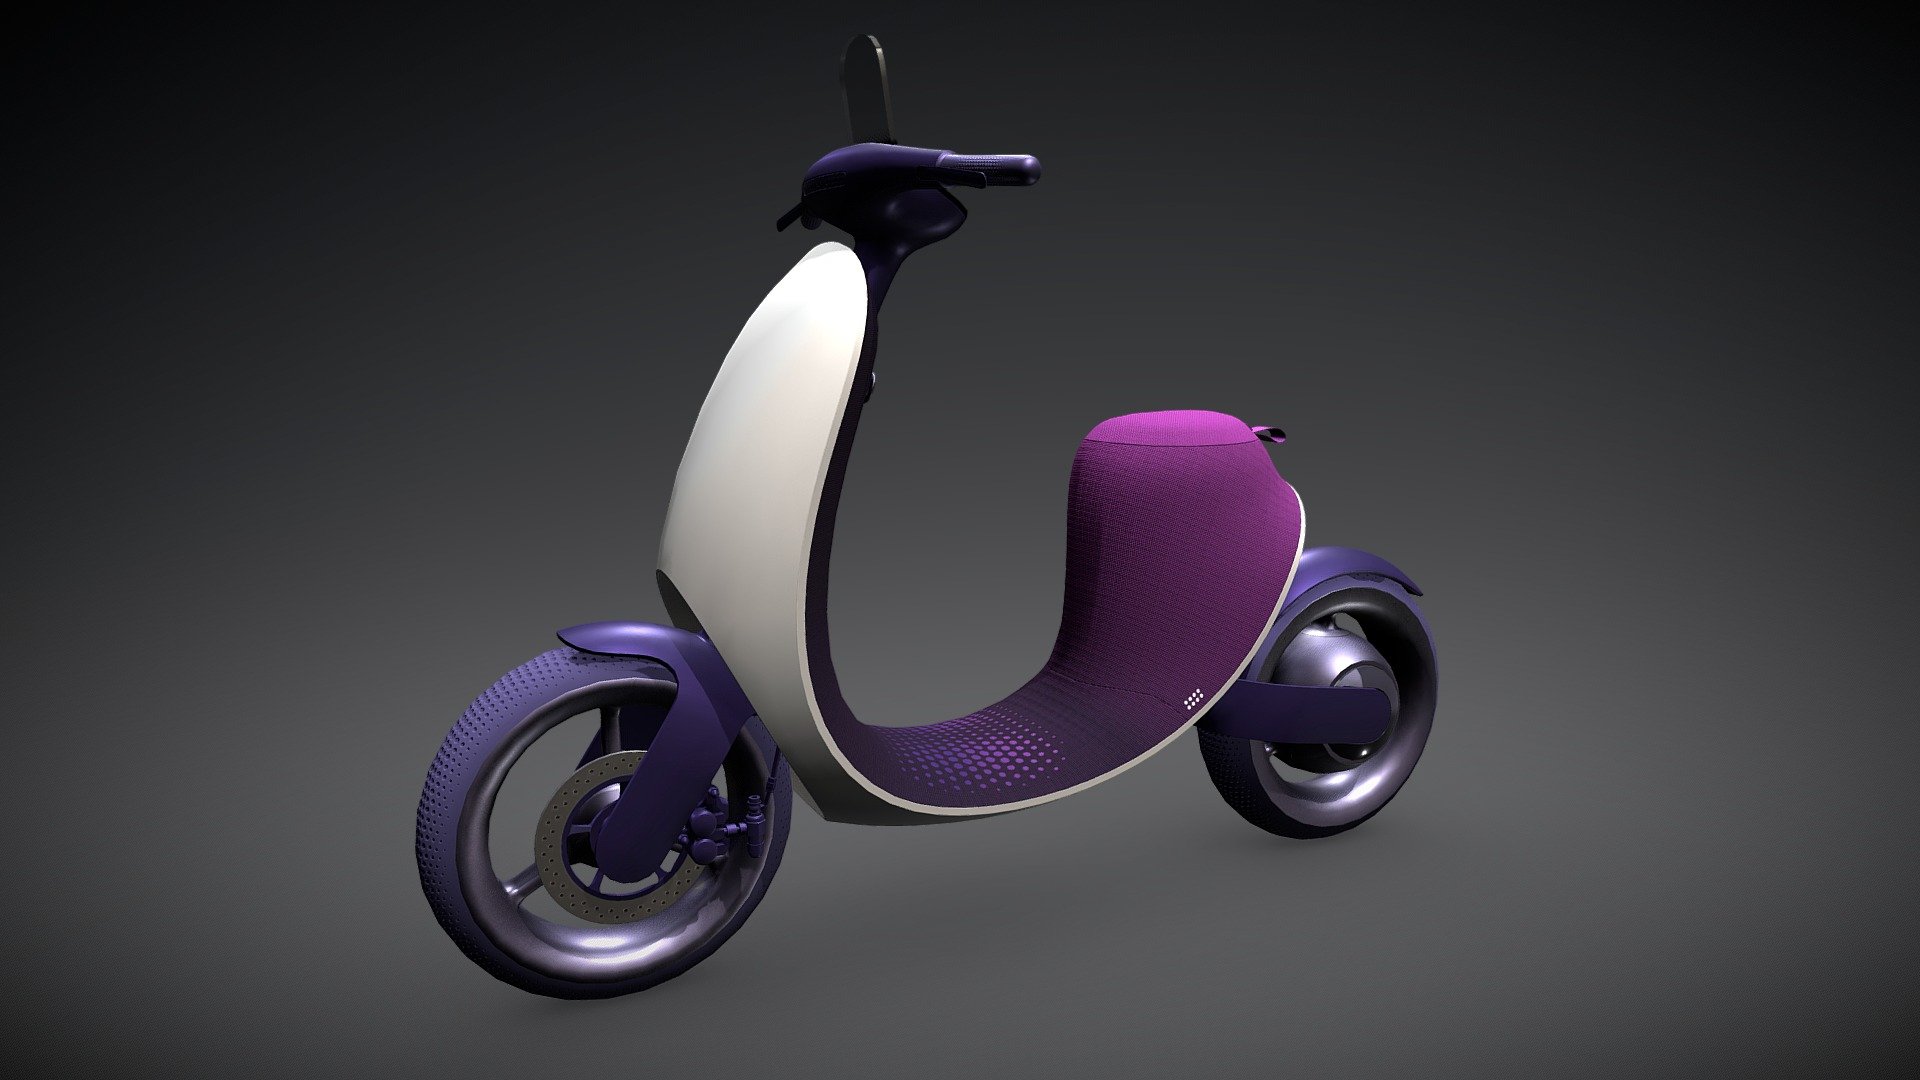 Low poly model of Nebula scooter. Model made for the customer. 
Poly count ~23k triangles 3d model